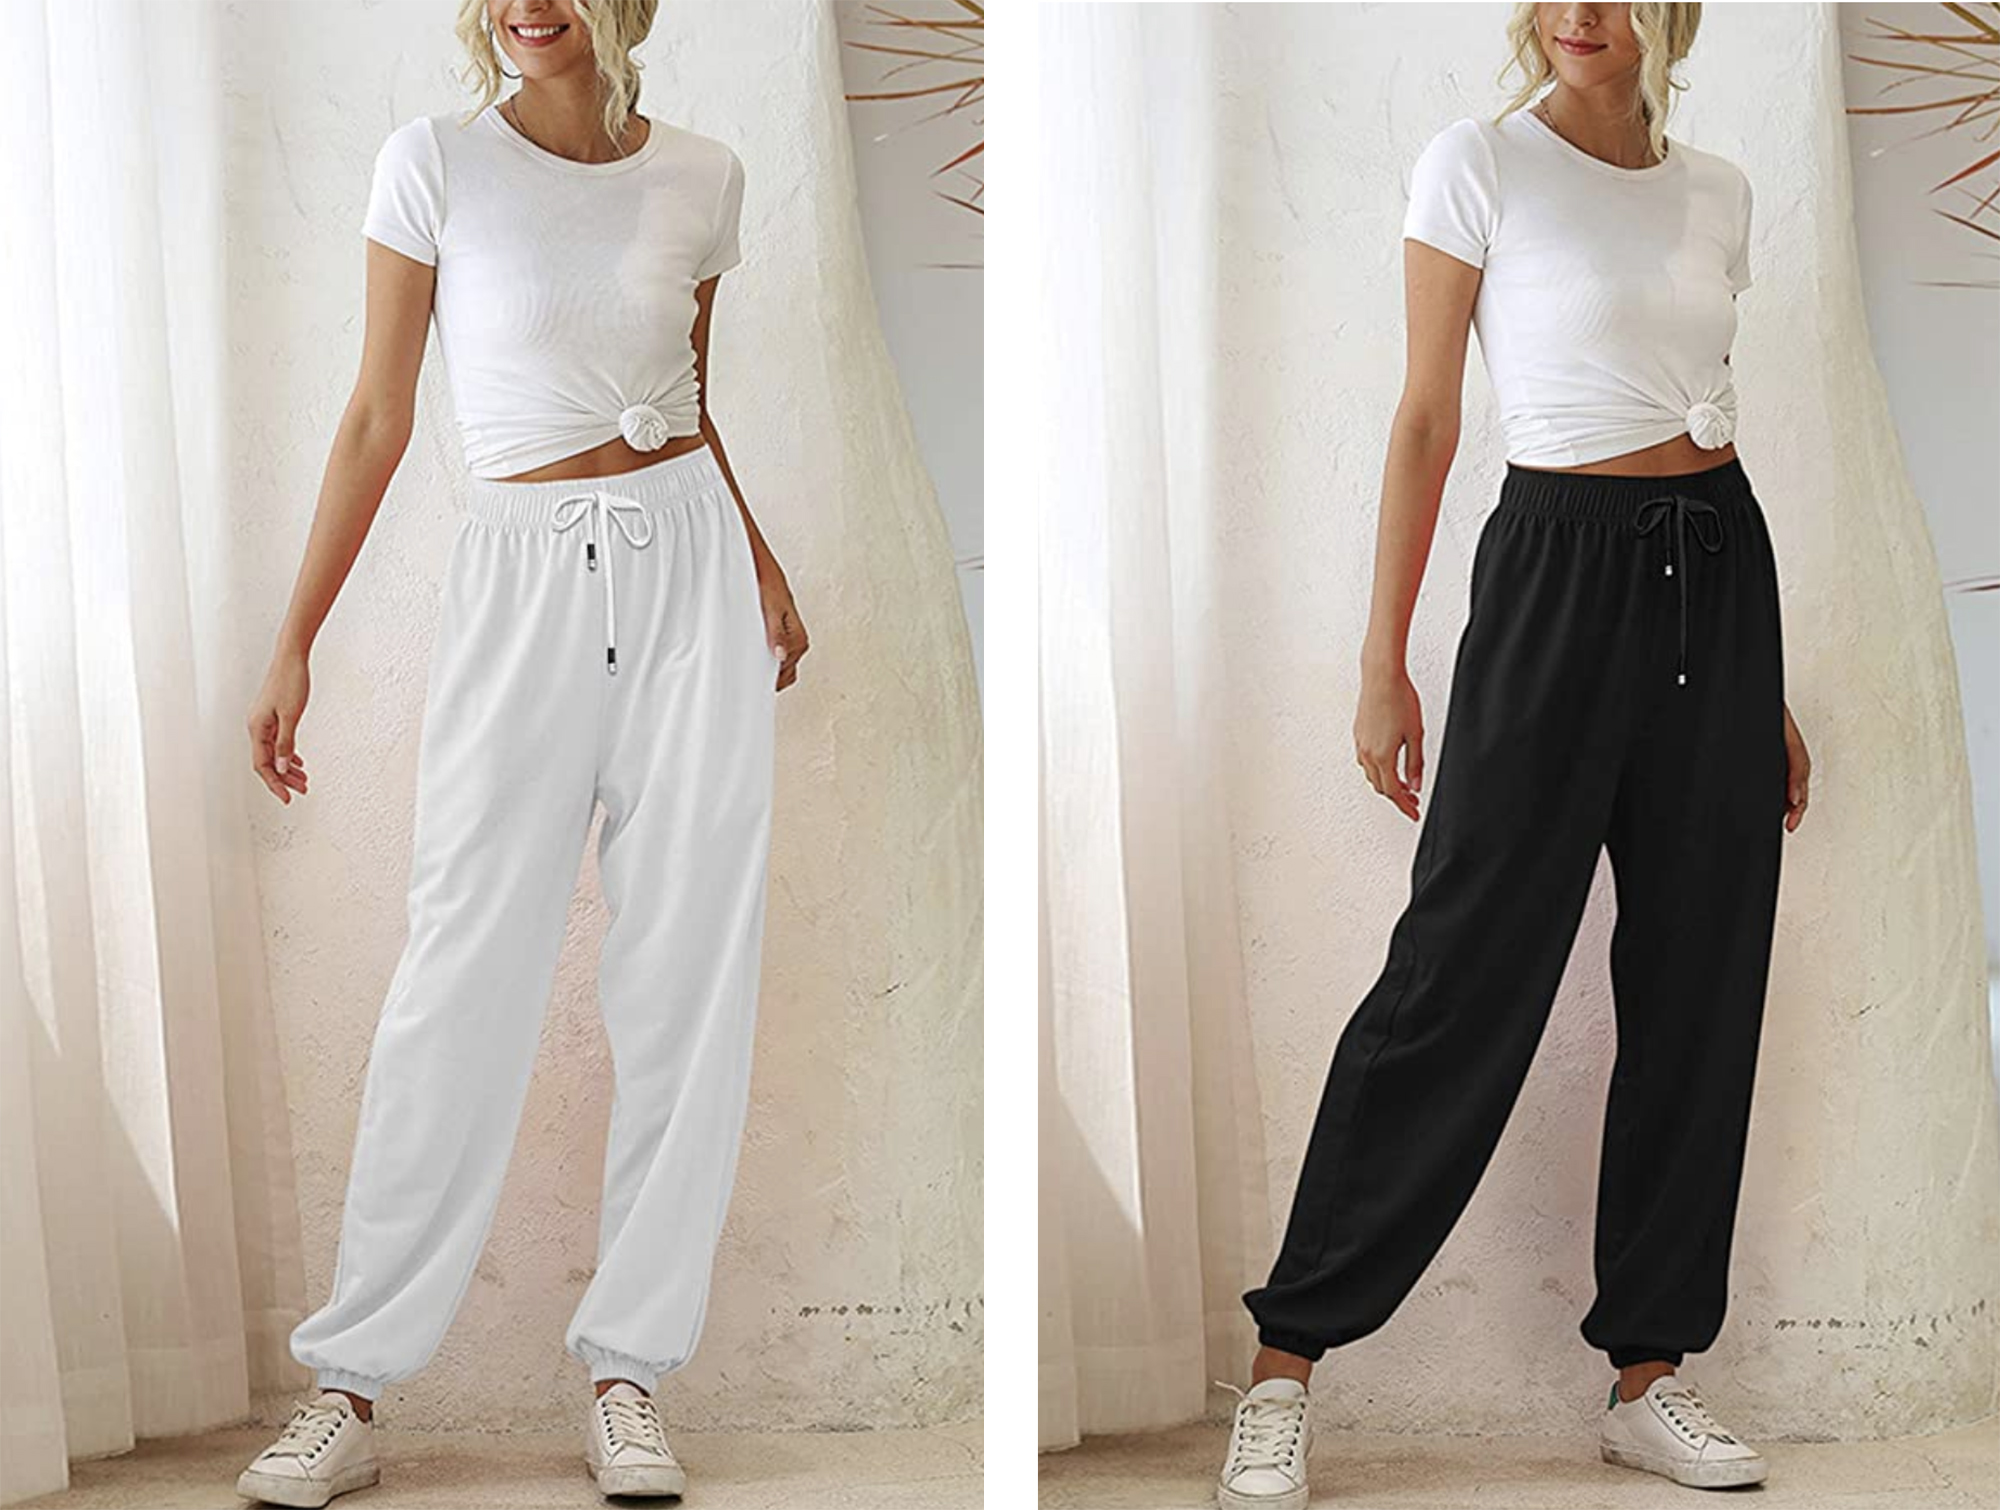 Yidarton Lounge Pants Are So Affordable and Comfortable